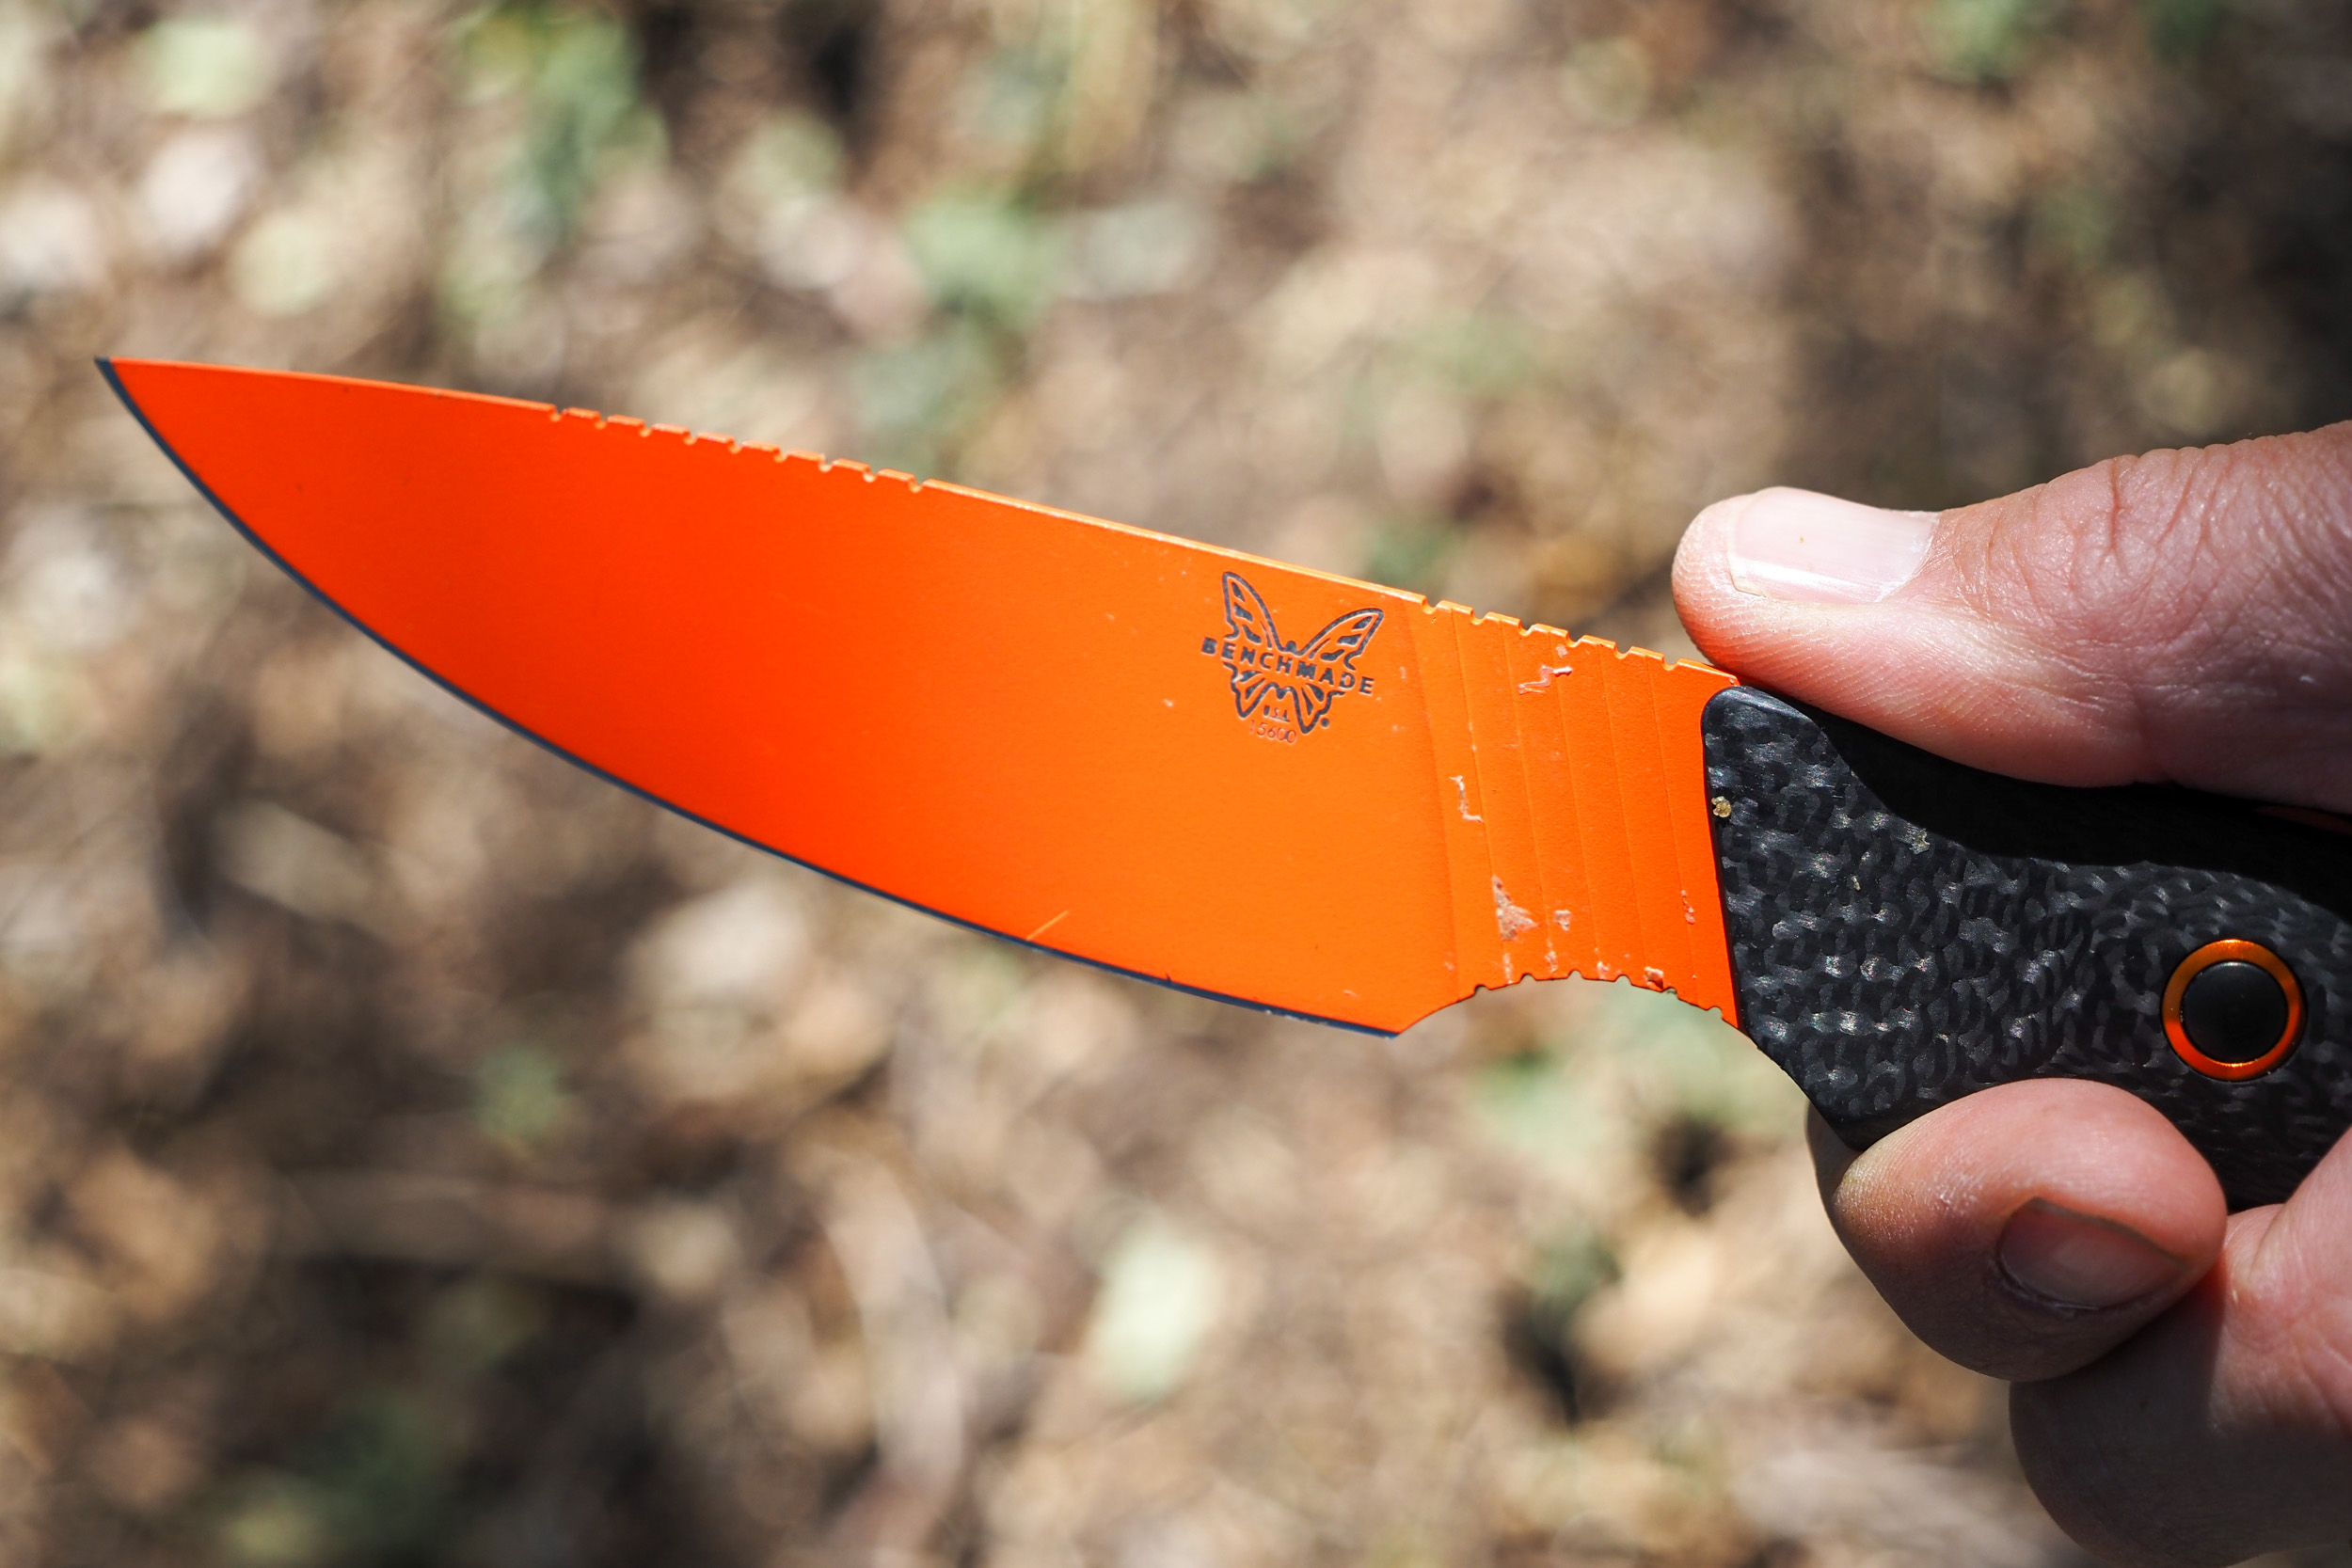 A hand holds a Benchmade Raghorn hunting knife with orange blade